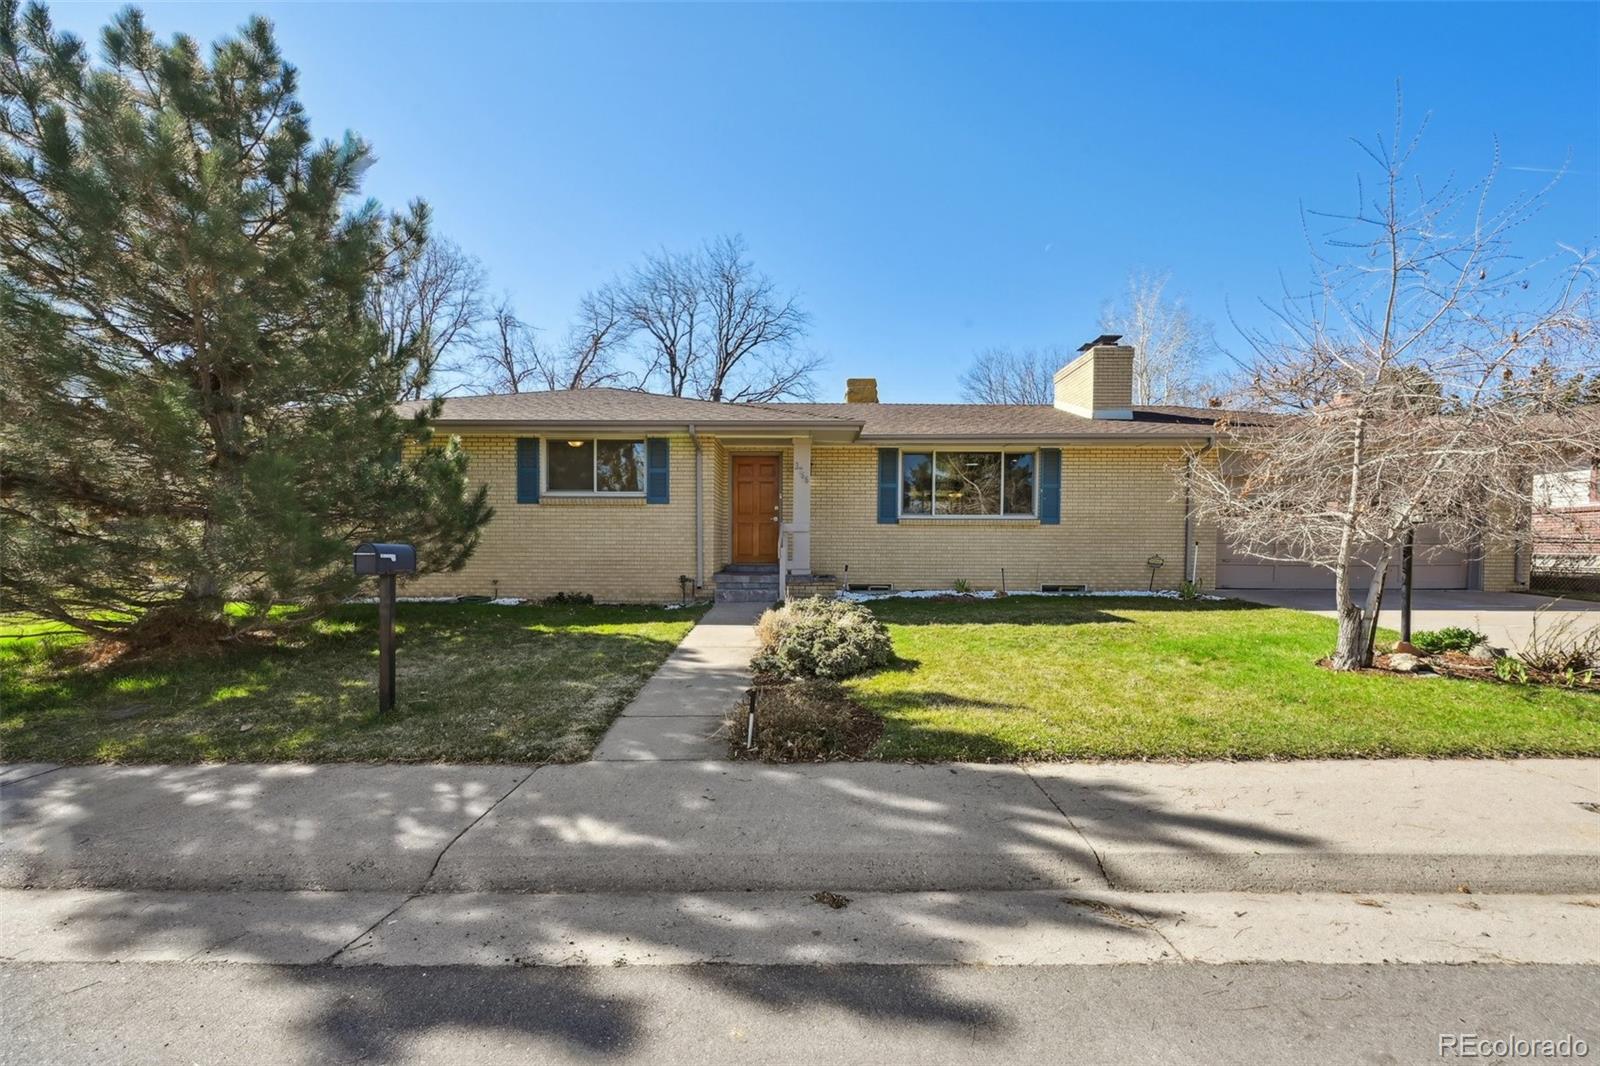 3766 s benton way, denver sold home. Closed on 2024-04-30 for $627,000.